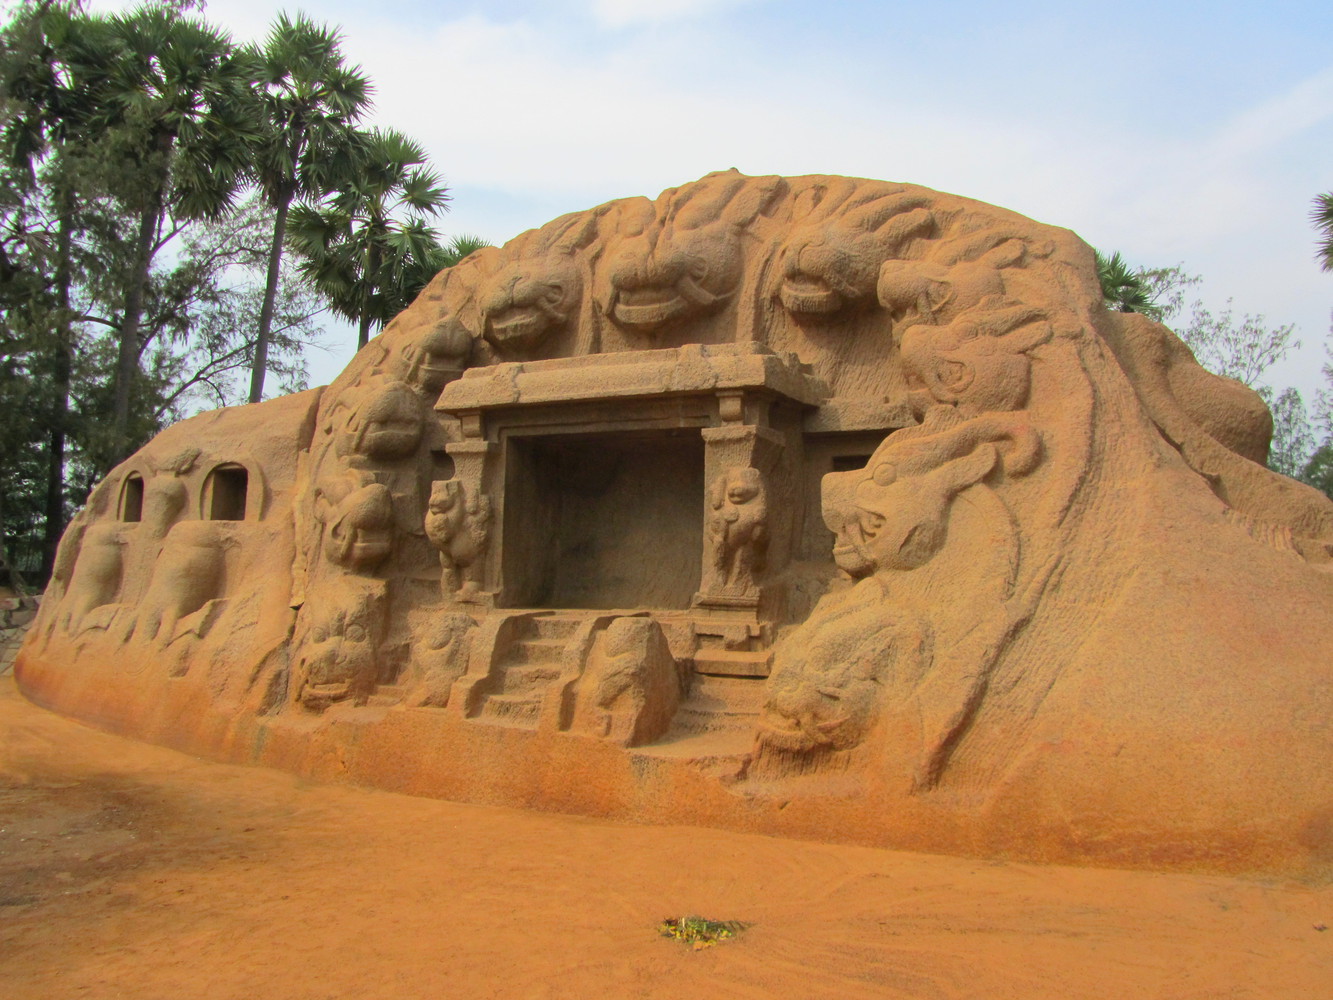 A rock-cut temple known as the Tiger Cave with tiger head carvings at the mouth of the cave